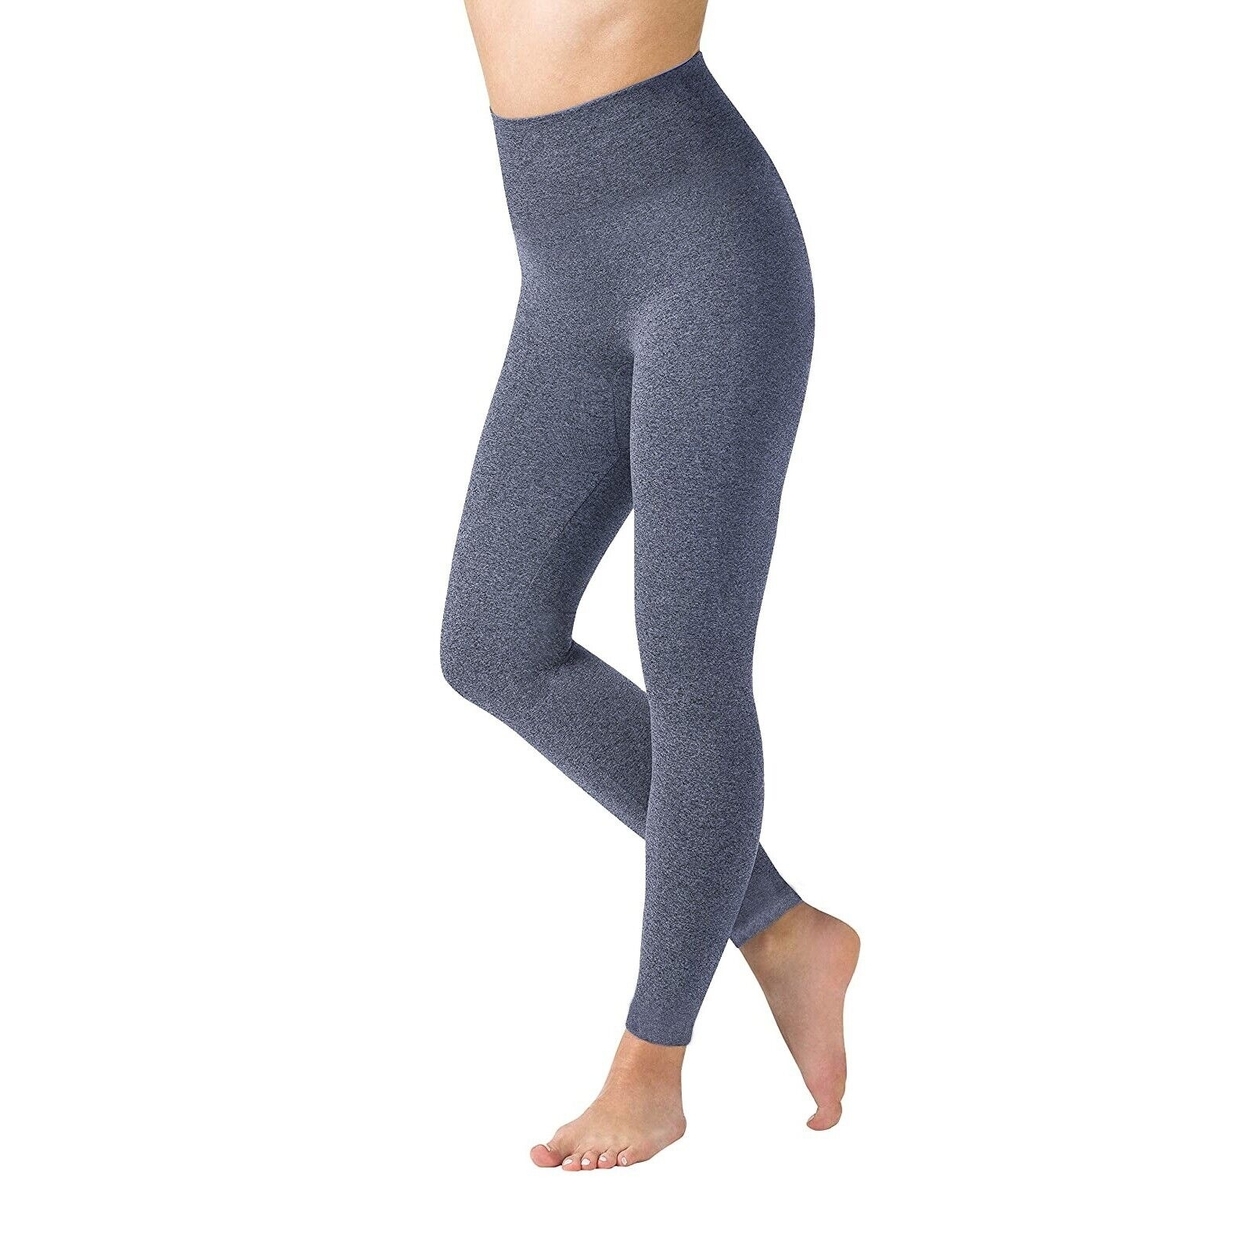 Multi-Packs Women High Waisted Fleece Lined Marled Leggings Ultra Soft Warm Pant - Charcoal/navy, 2, Small